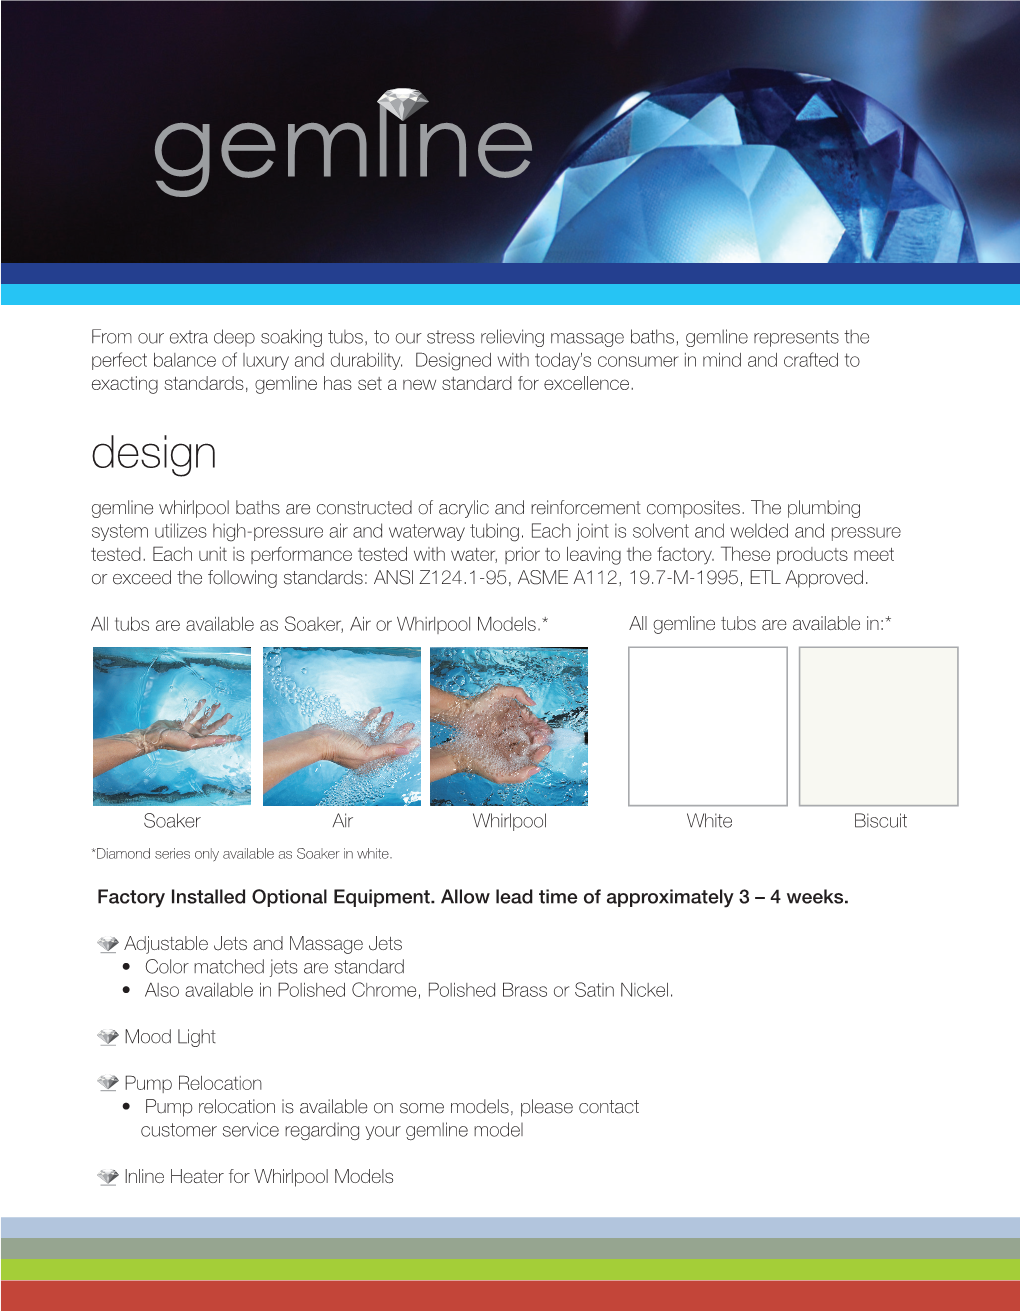 Gemline Tubs Are Available In:*